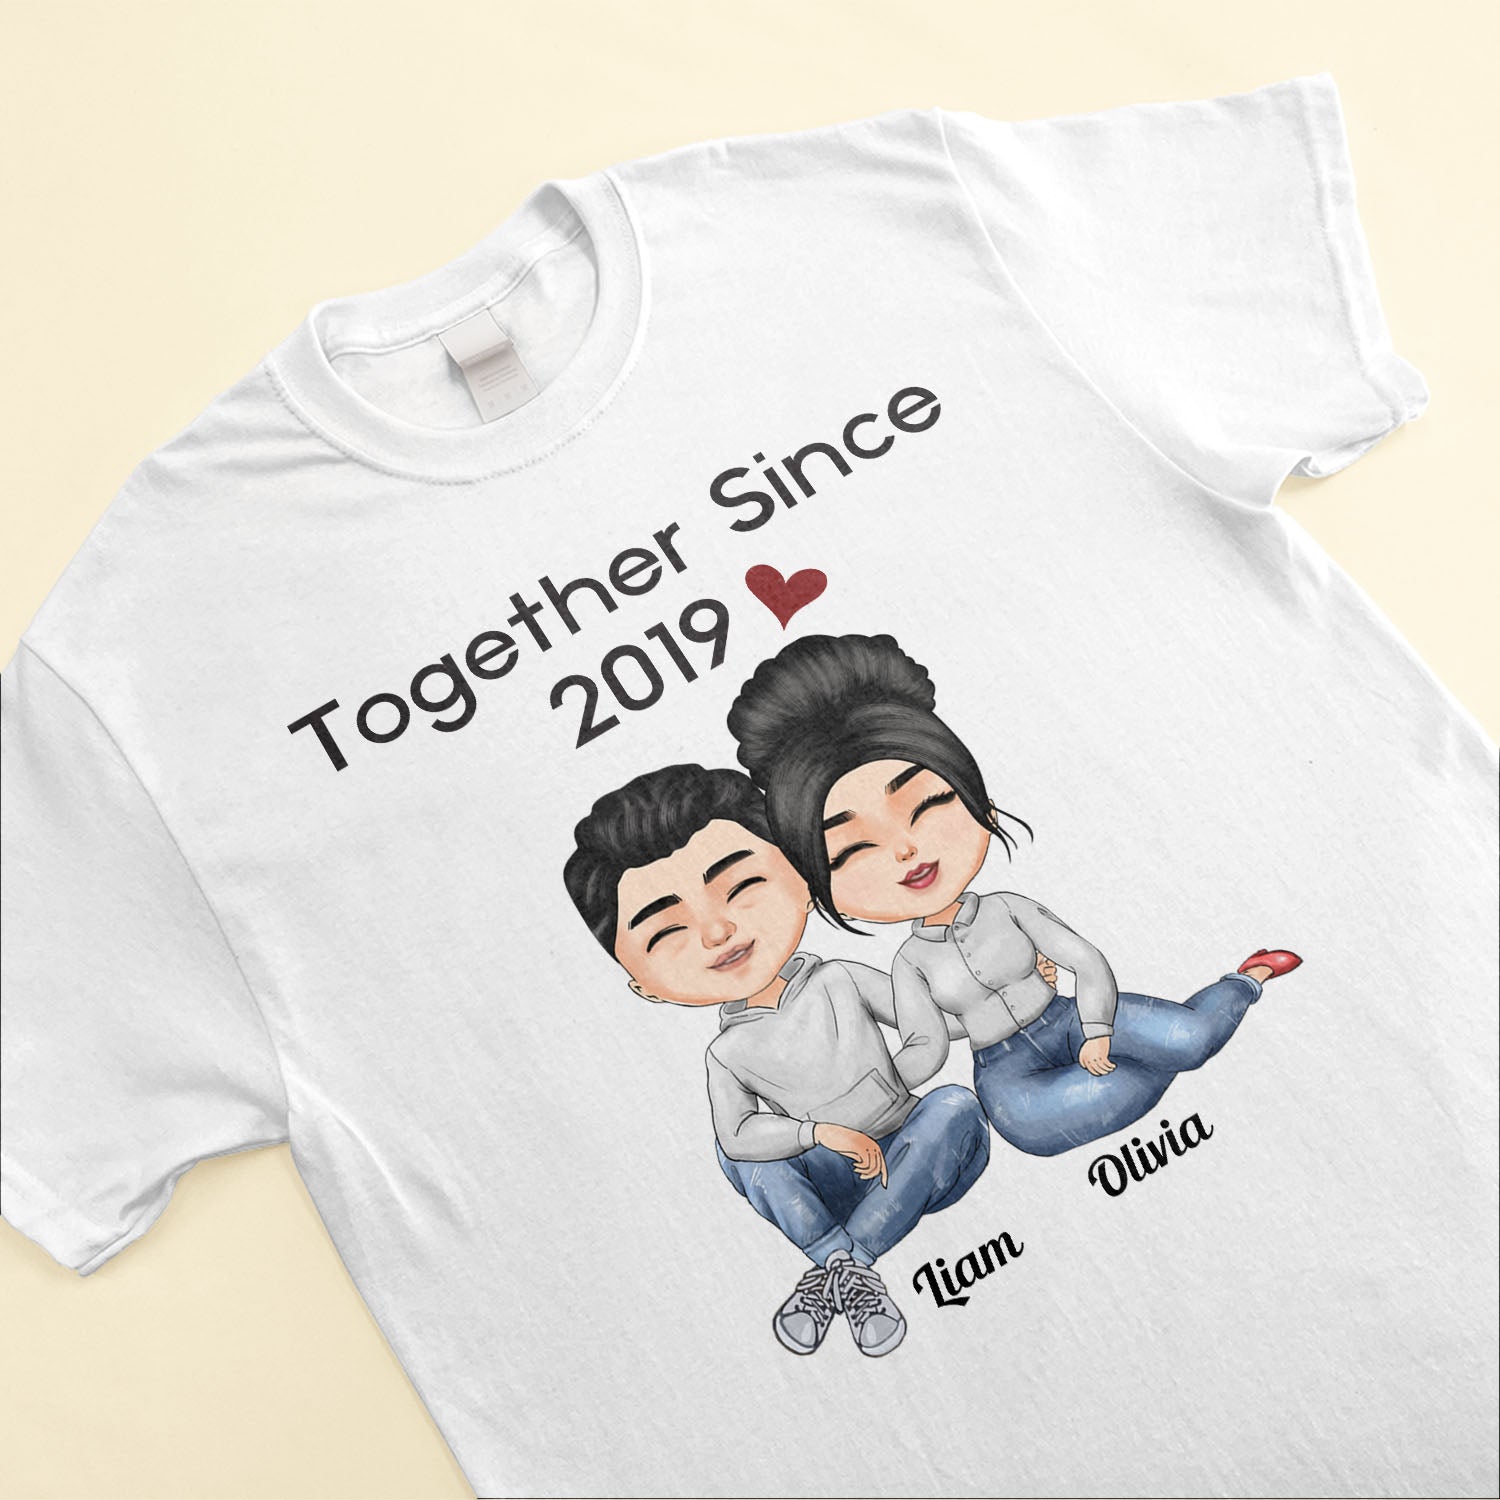 Together Since - Personalized Shirt - Anniversary, Valentine's Day Gift For Spouse, Husband, Wife, Lovers, Girlfriend, Boyfriend